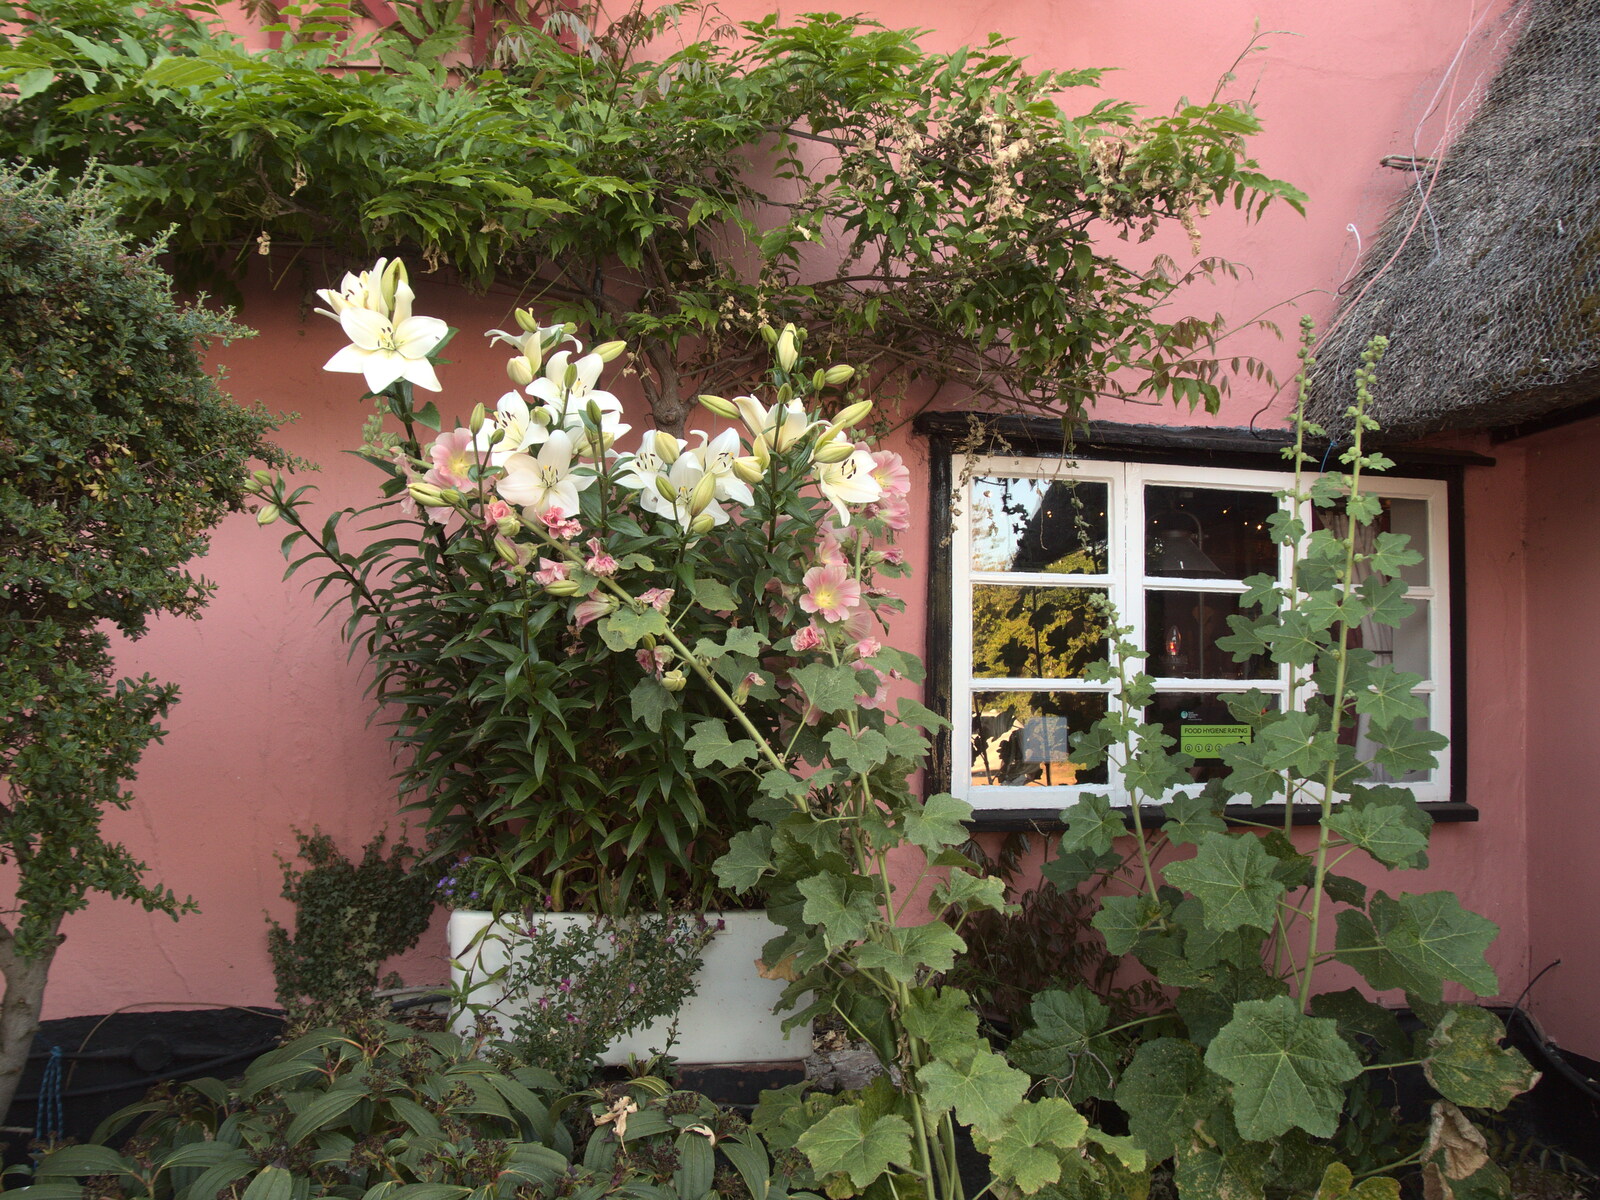 Nice flowers around the window of the pub from Pizza at the Village Hall, Brome, Suffolk - 24th June 2022